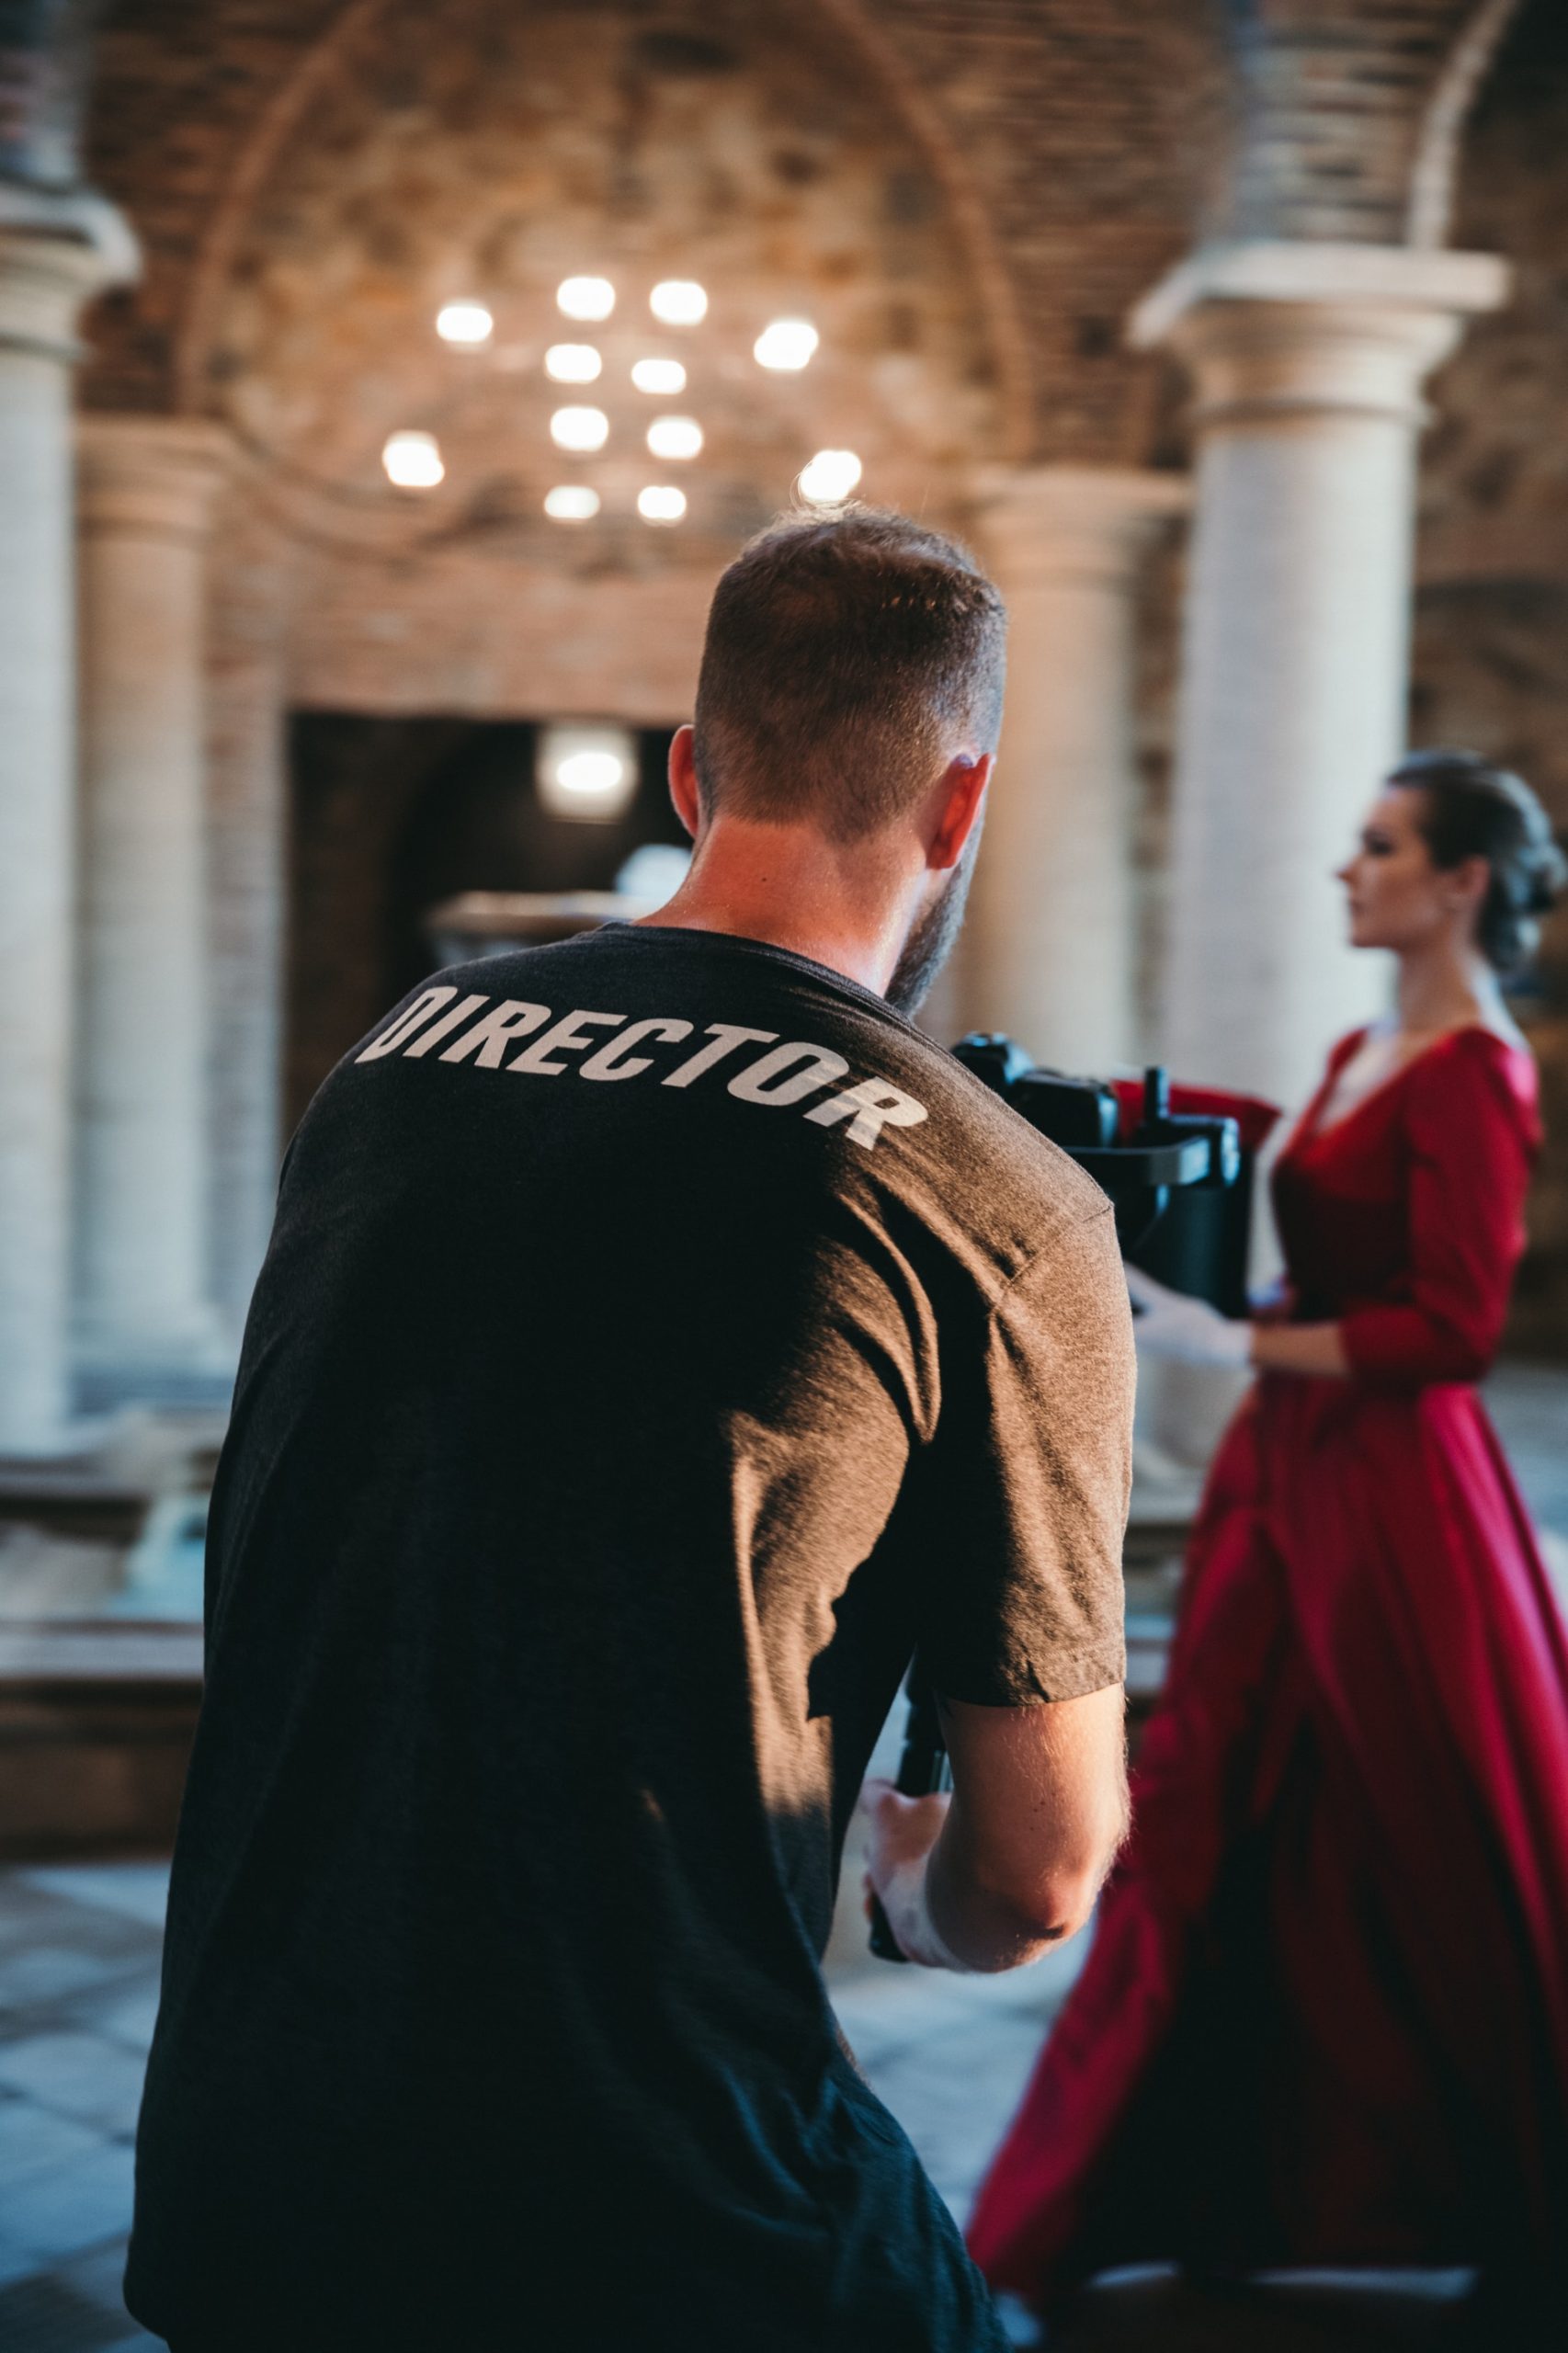 A director filming a woman in a red dress